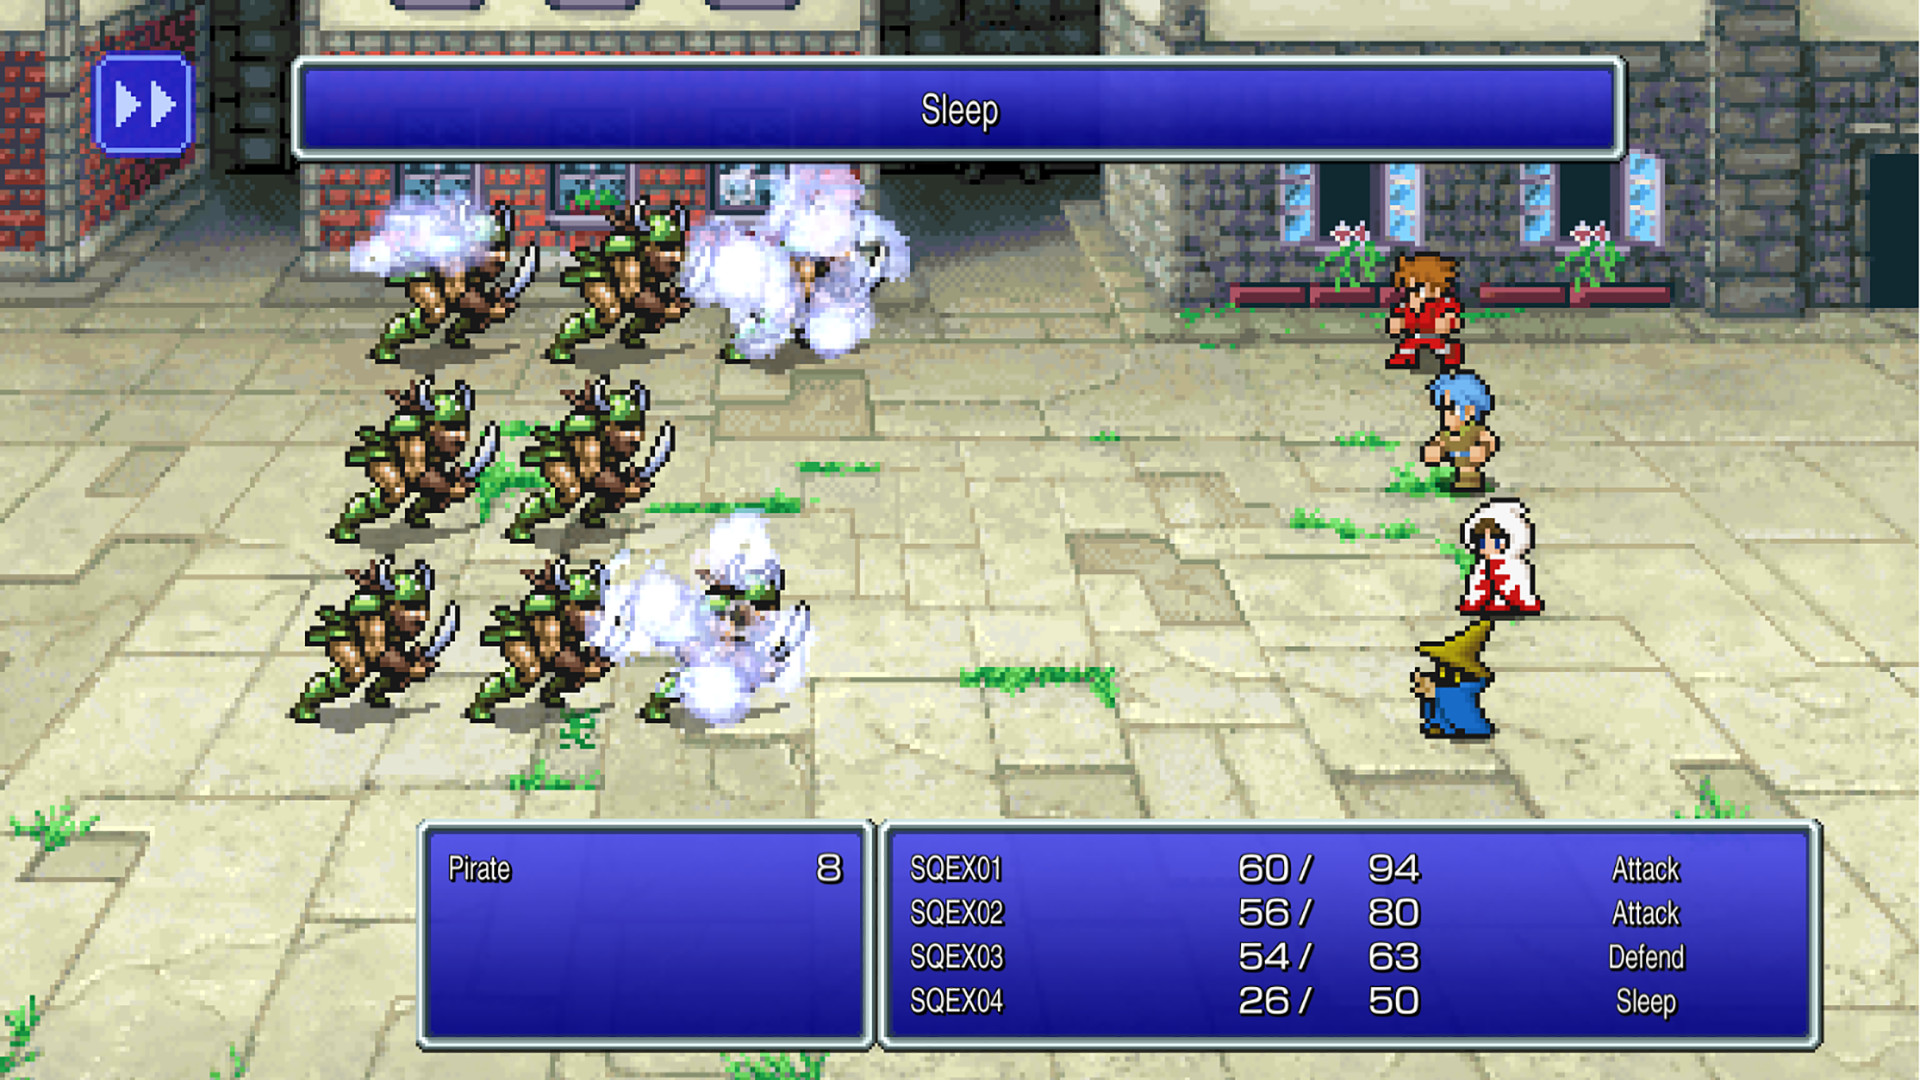 The 10 best Final Fantasy games on PC